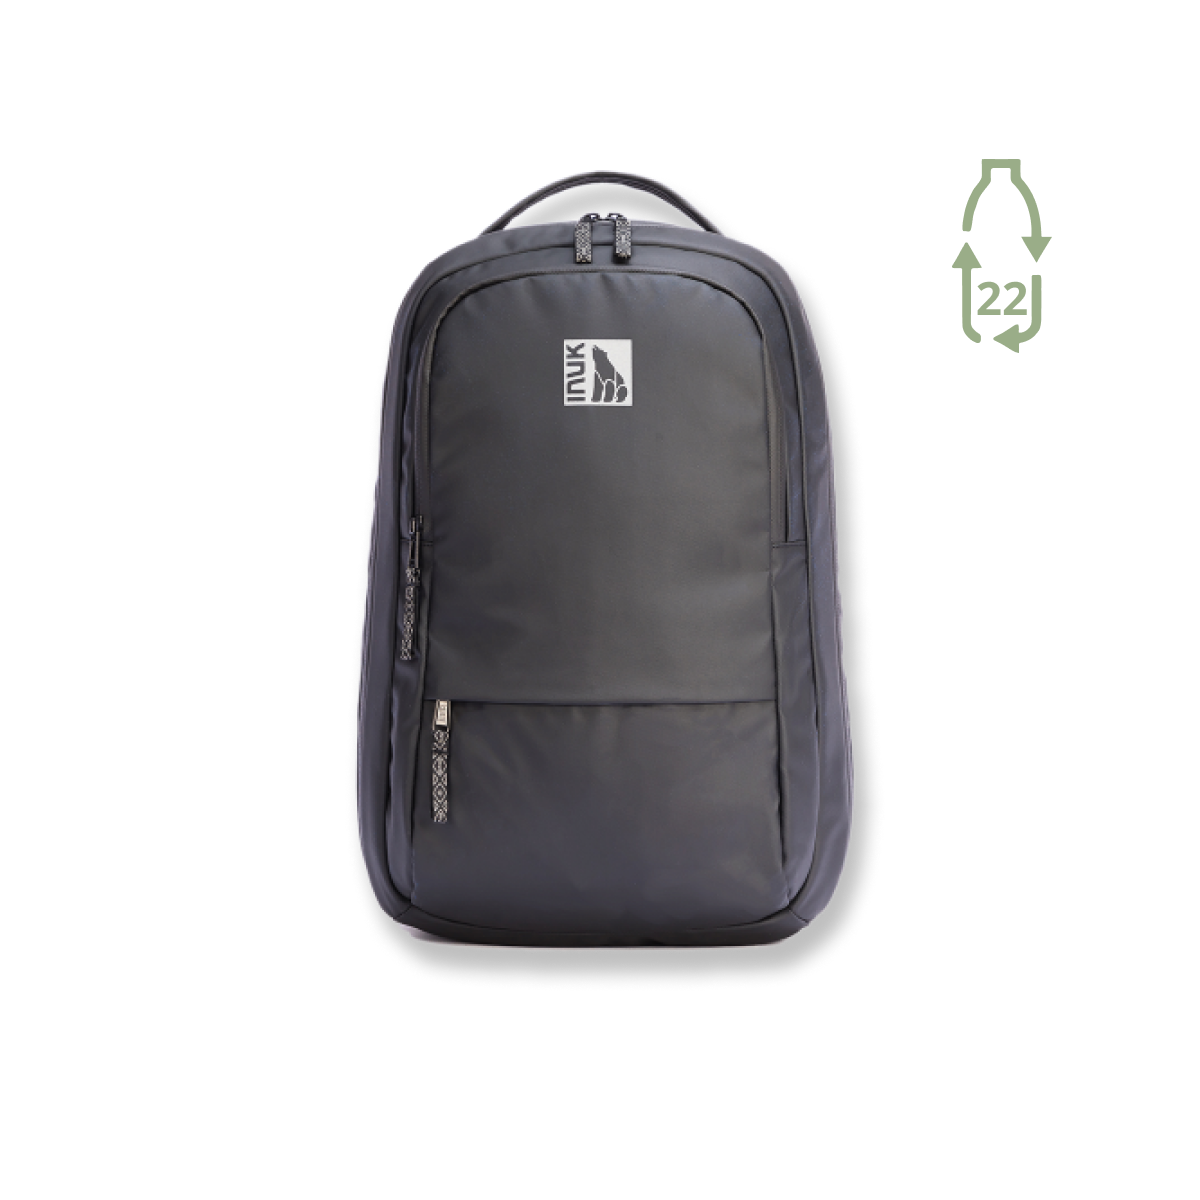 Watershed Granite Backpack - Recycled Materials (19.6L)